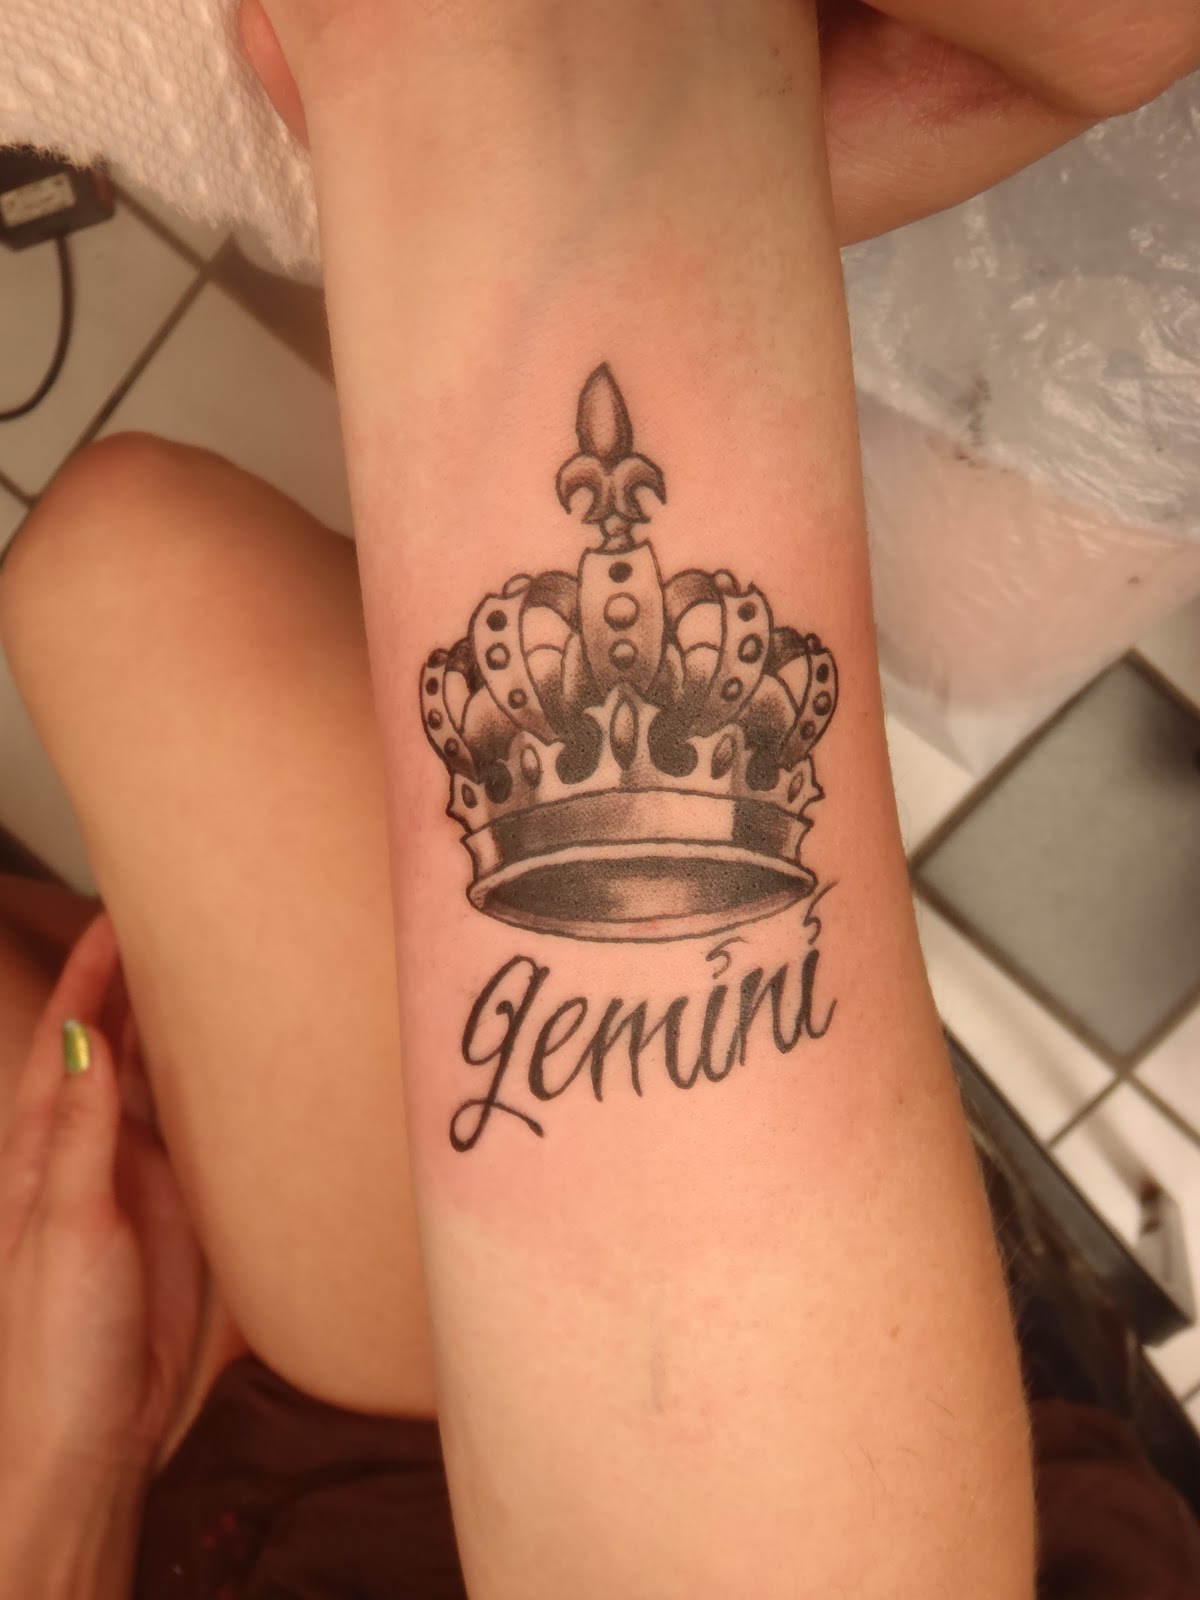 Crown Tattoos Designs, Ideas and Meaning | Tattoos For You